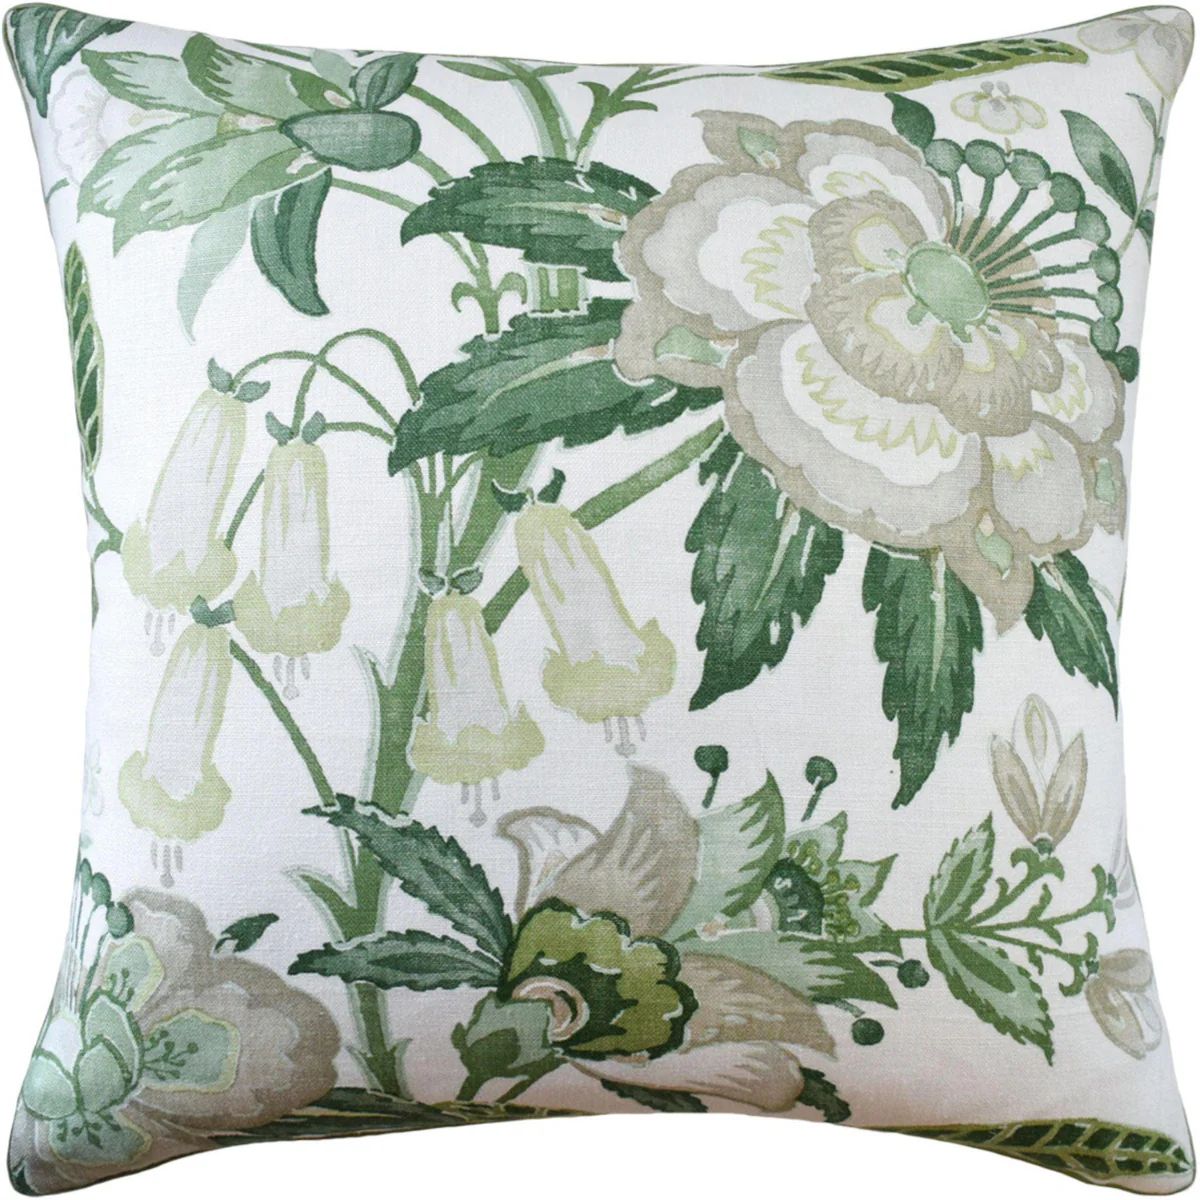 Green Floral Design Linen Pillow | The Well Appointed House, LLC